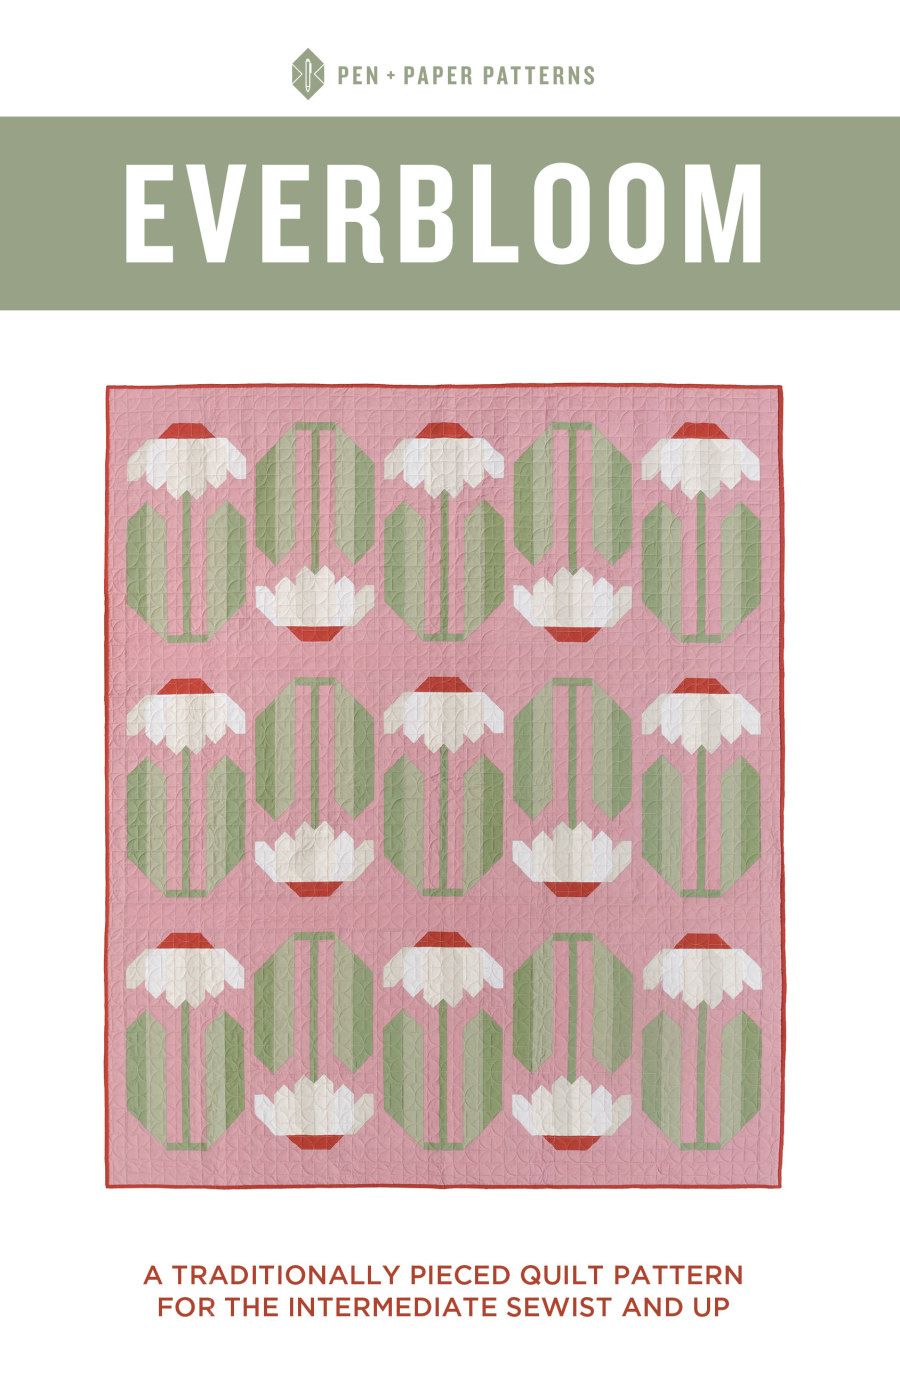 Everbloom Quilt Pattern by Pen + Paper